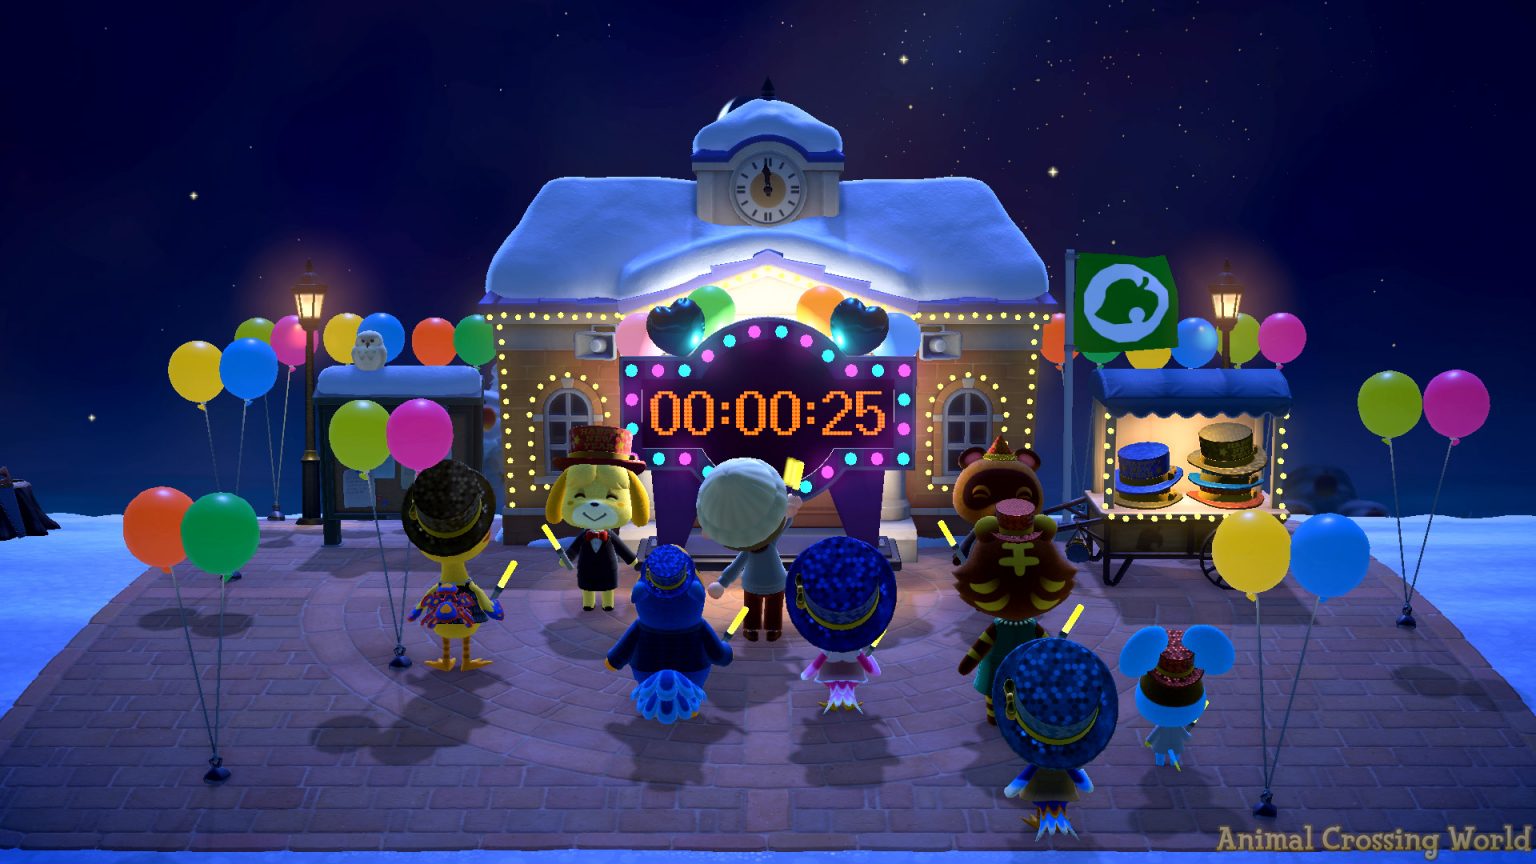 Celebrate New Year's Eve In Animal Crossing: New Horizons Tonight - Don